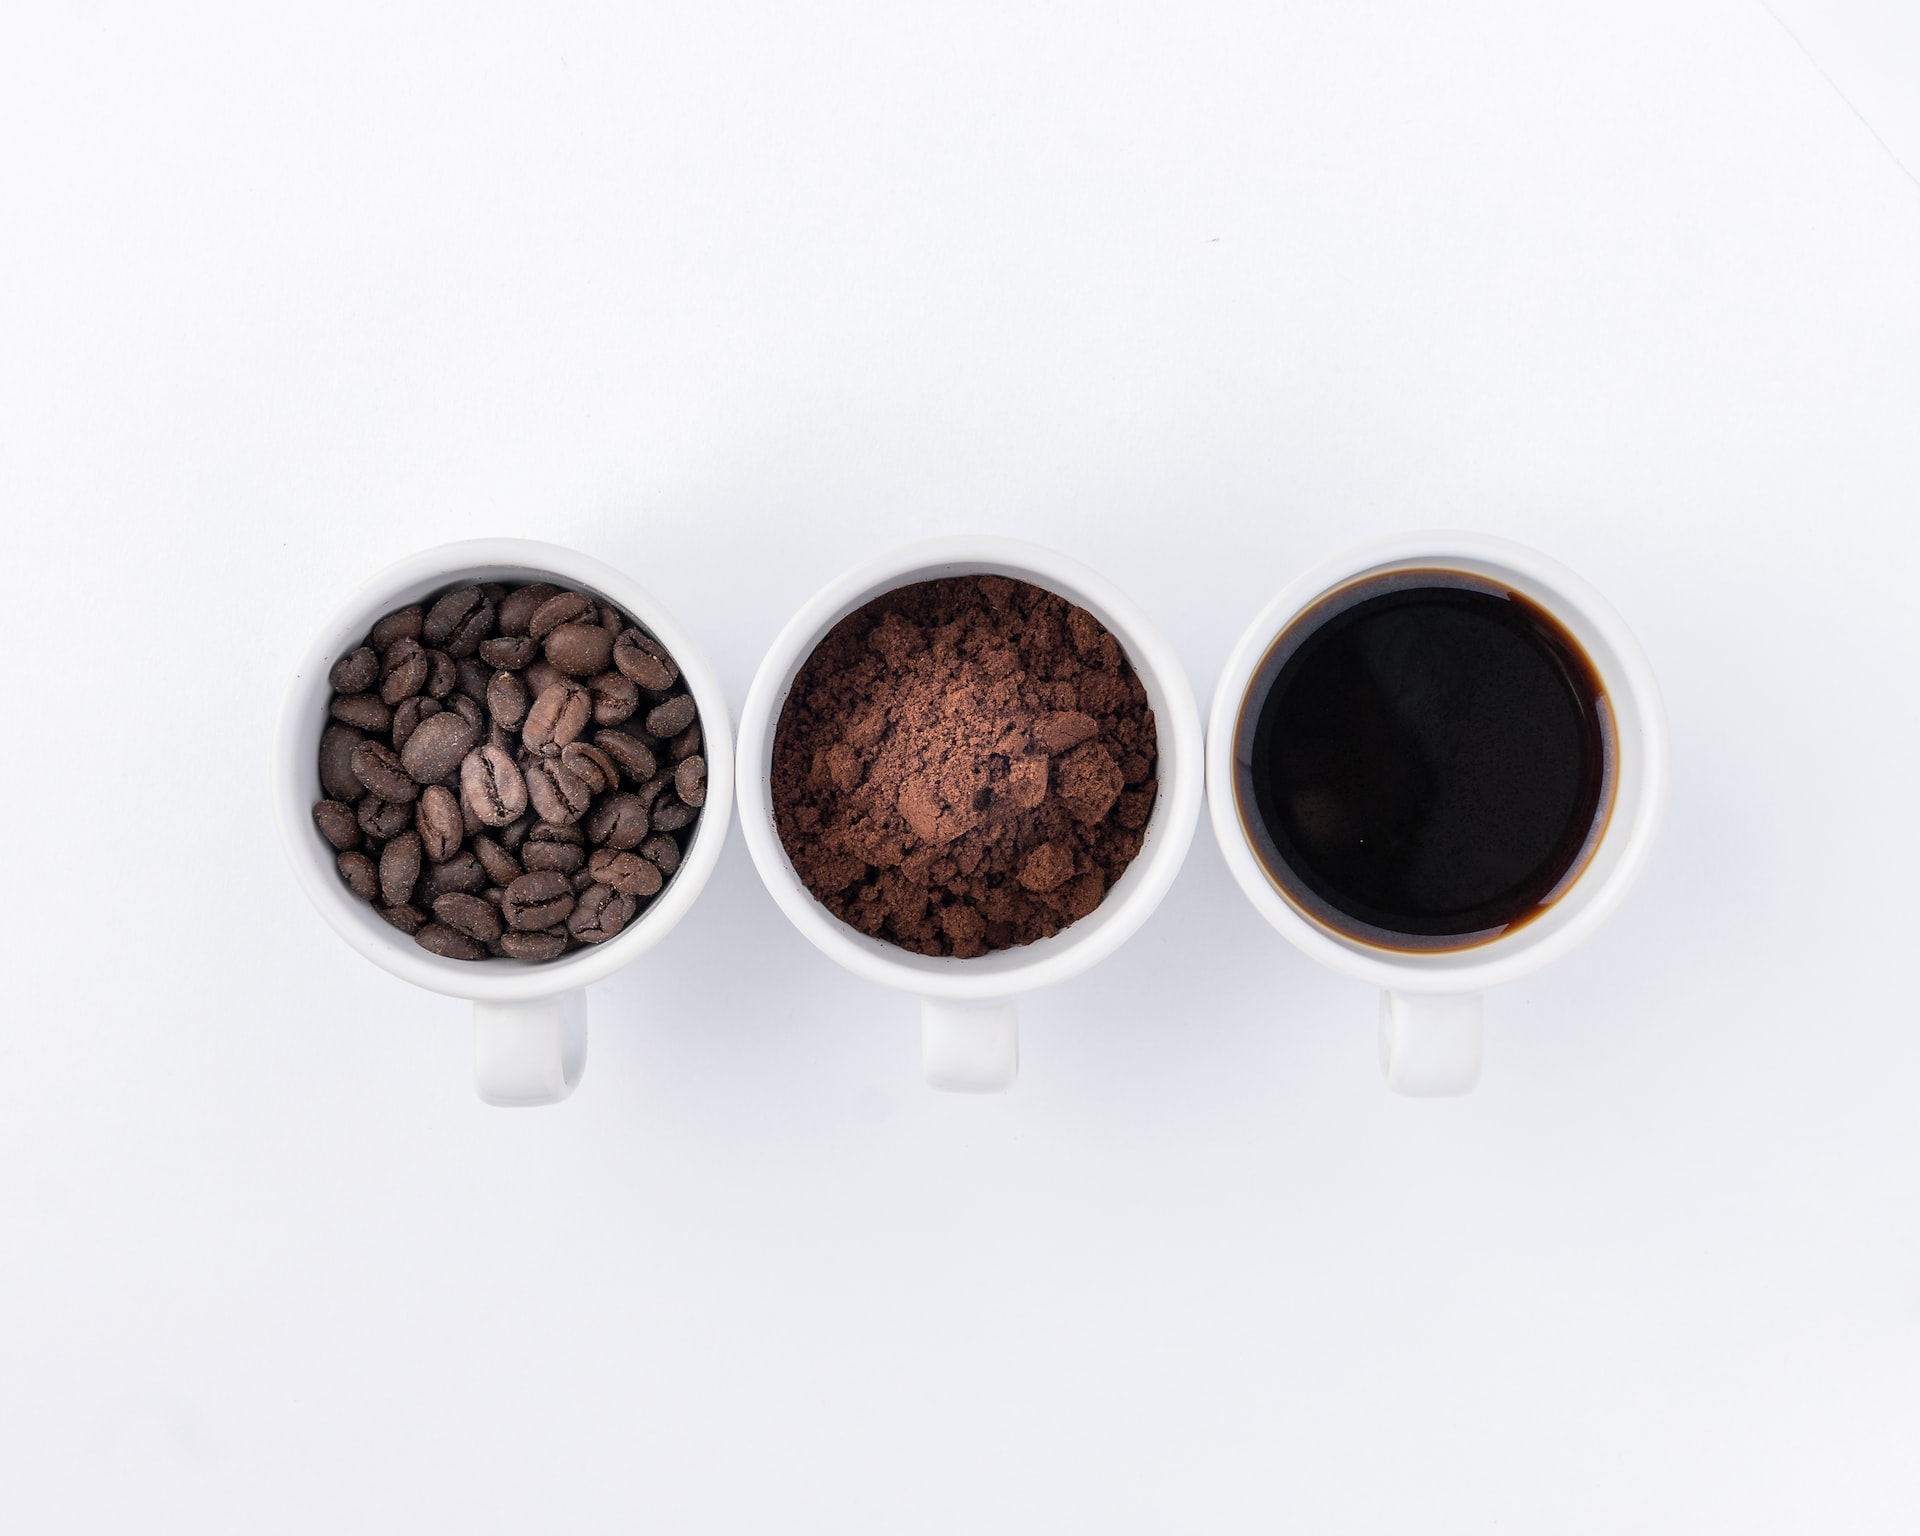 Cups showing the stages of coffee